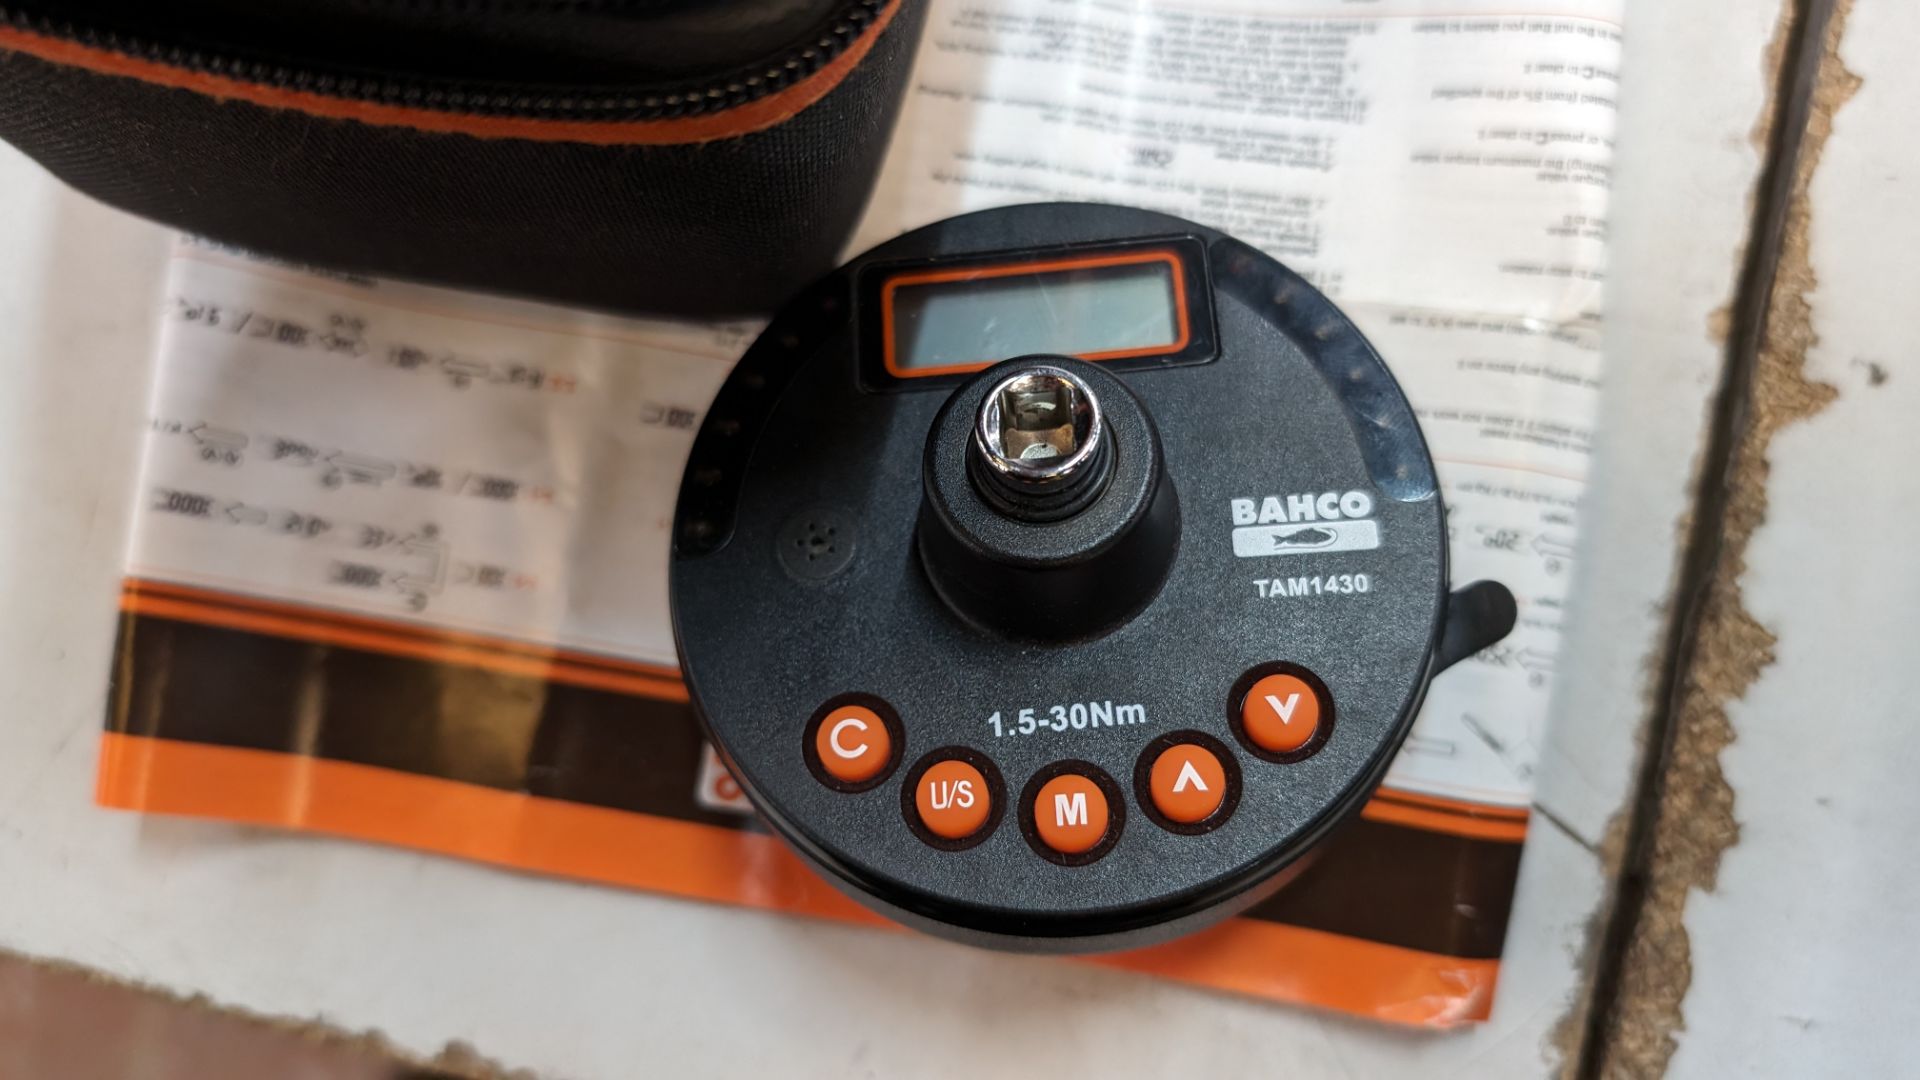 Bahco model TAM1430 electronic torque/angle measuring adaptor in case - Image 4 of 8